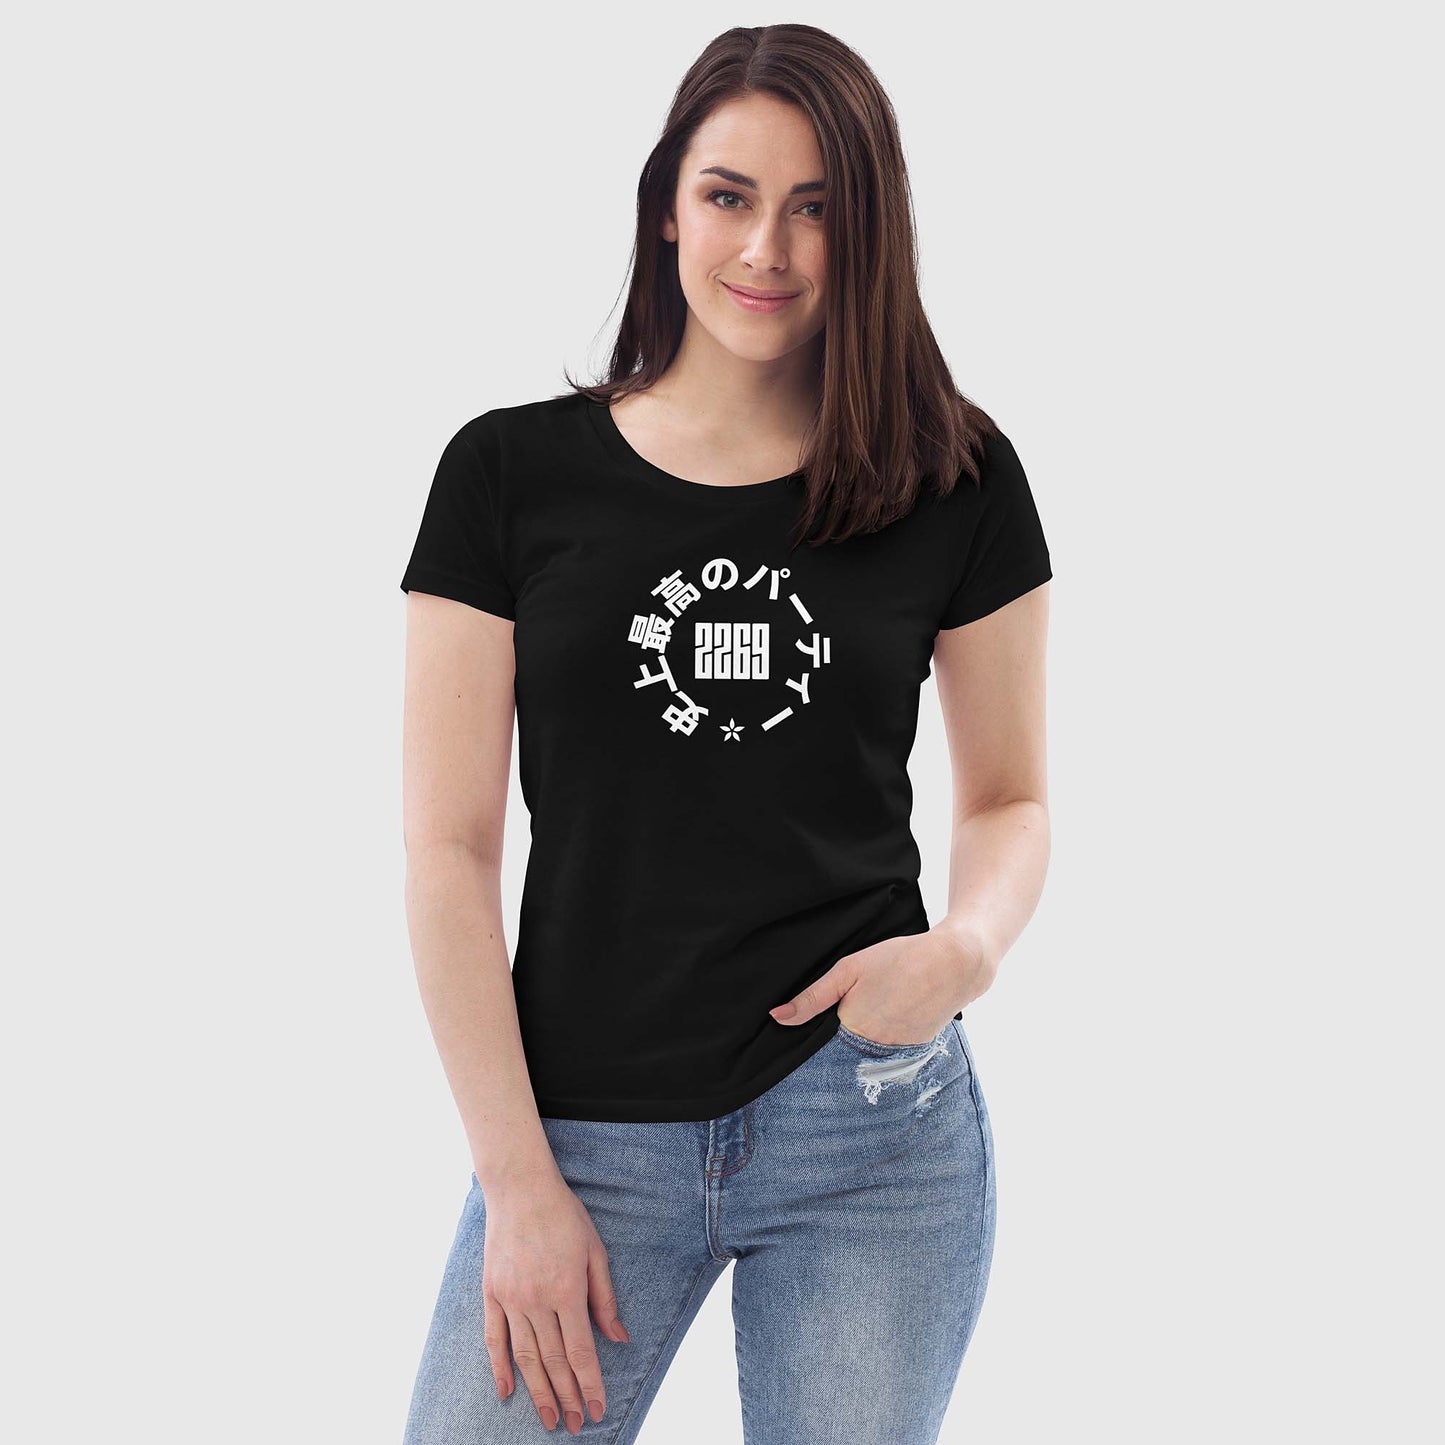 Women's black fitted organic cotton t-shirt with Japanese 2269 party circle